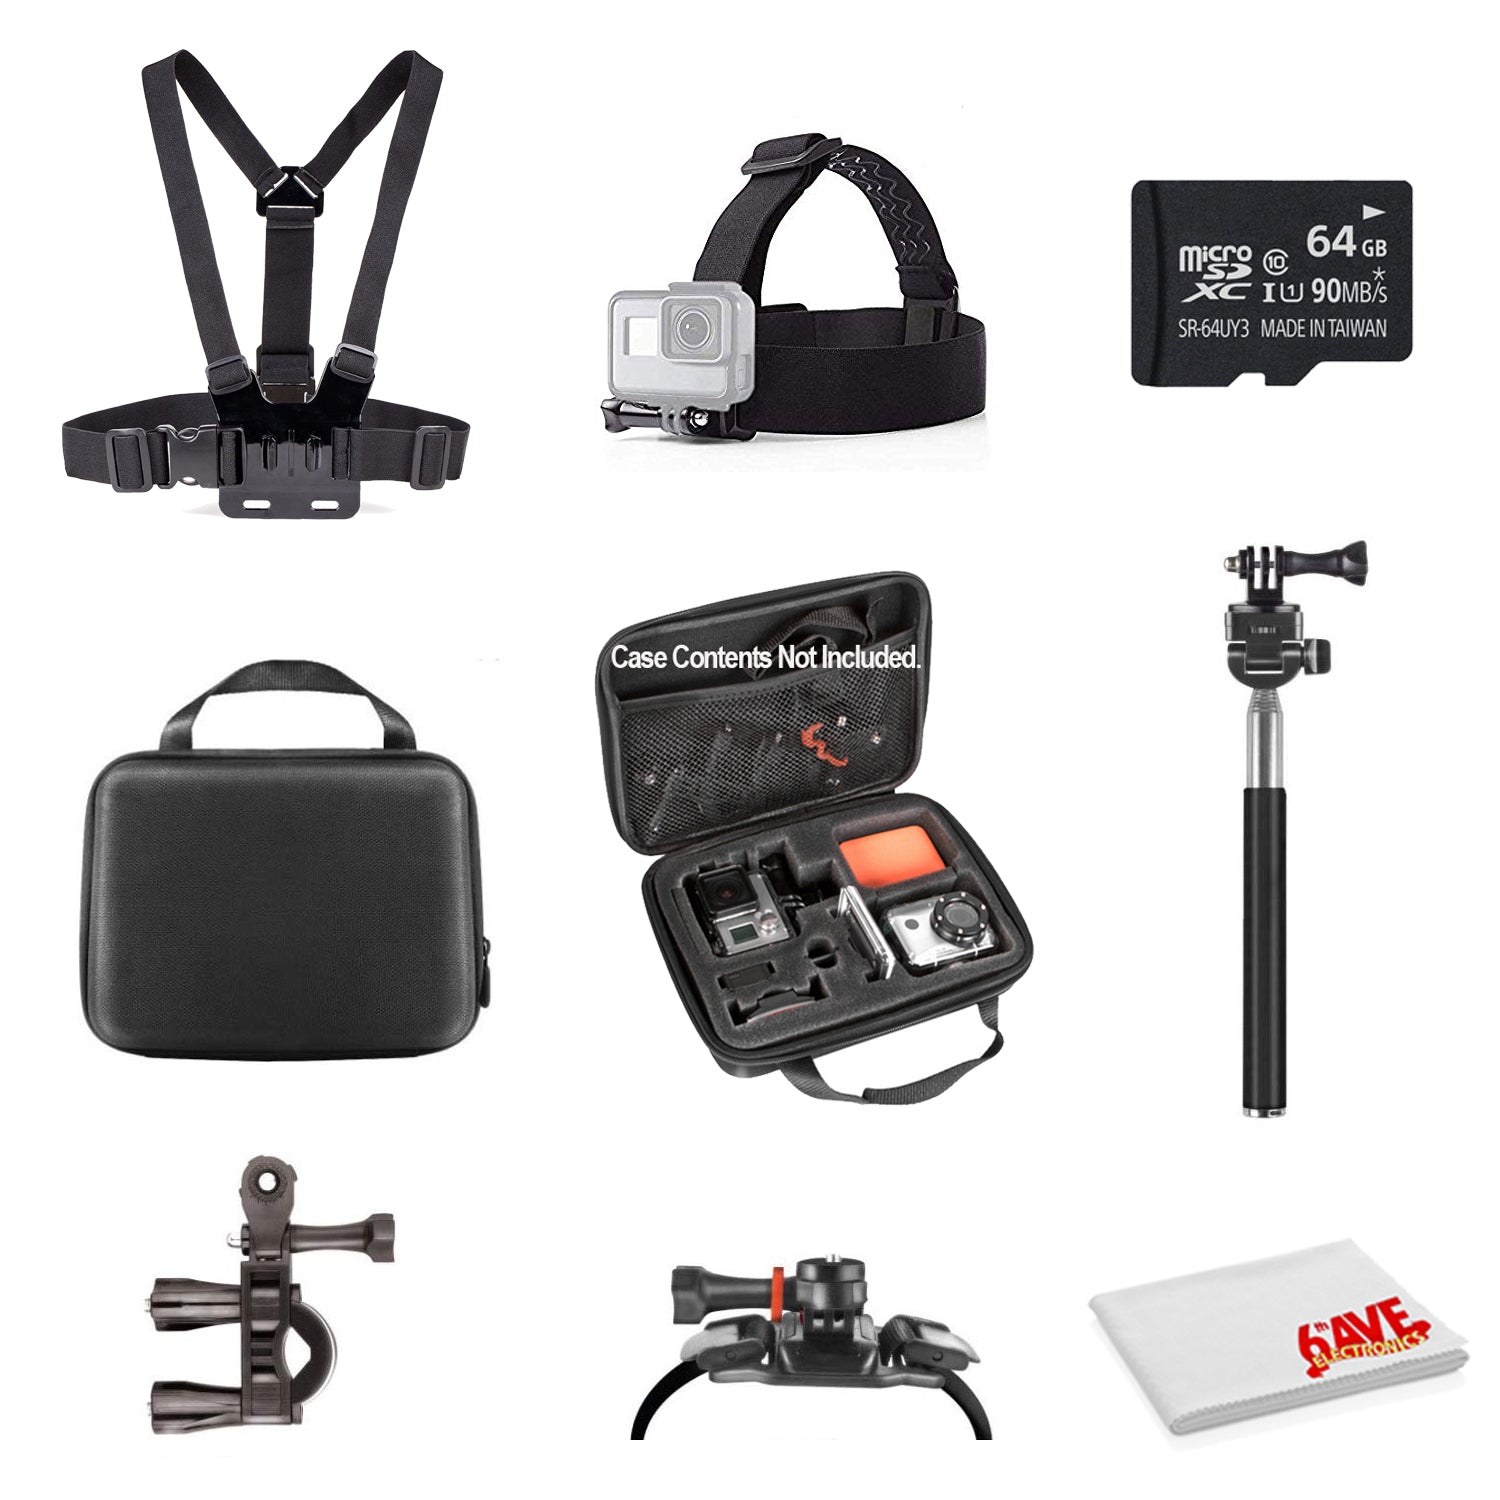 Basic Action Camera Accessory Kit Bundle With - 64GB MICRO SD CARD + MicroFiber Cleaning Cloth